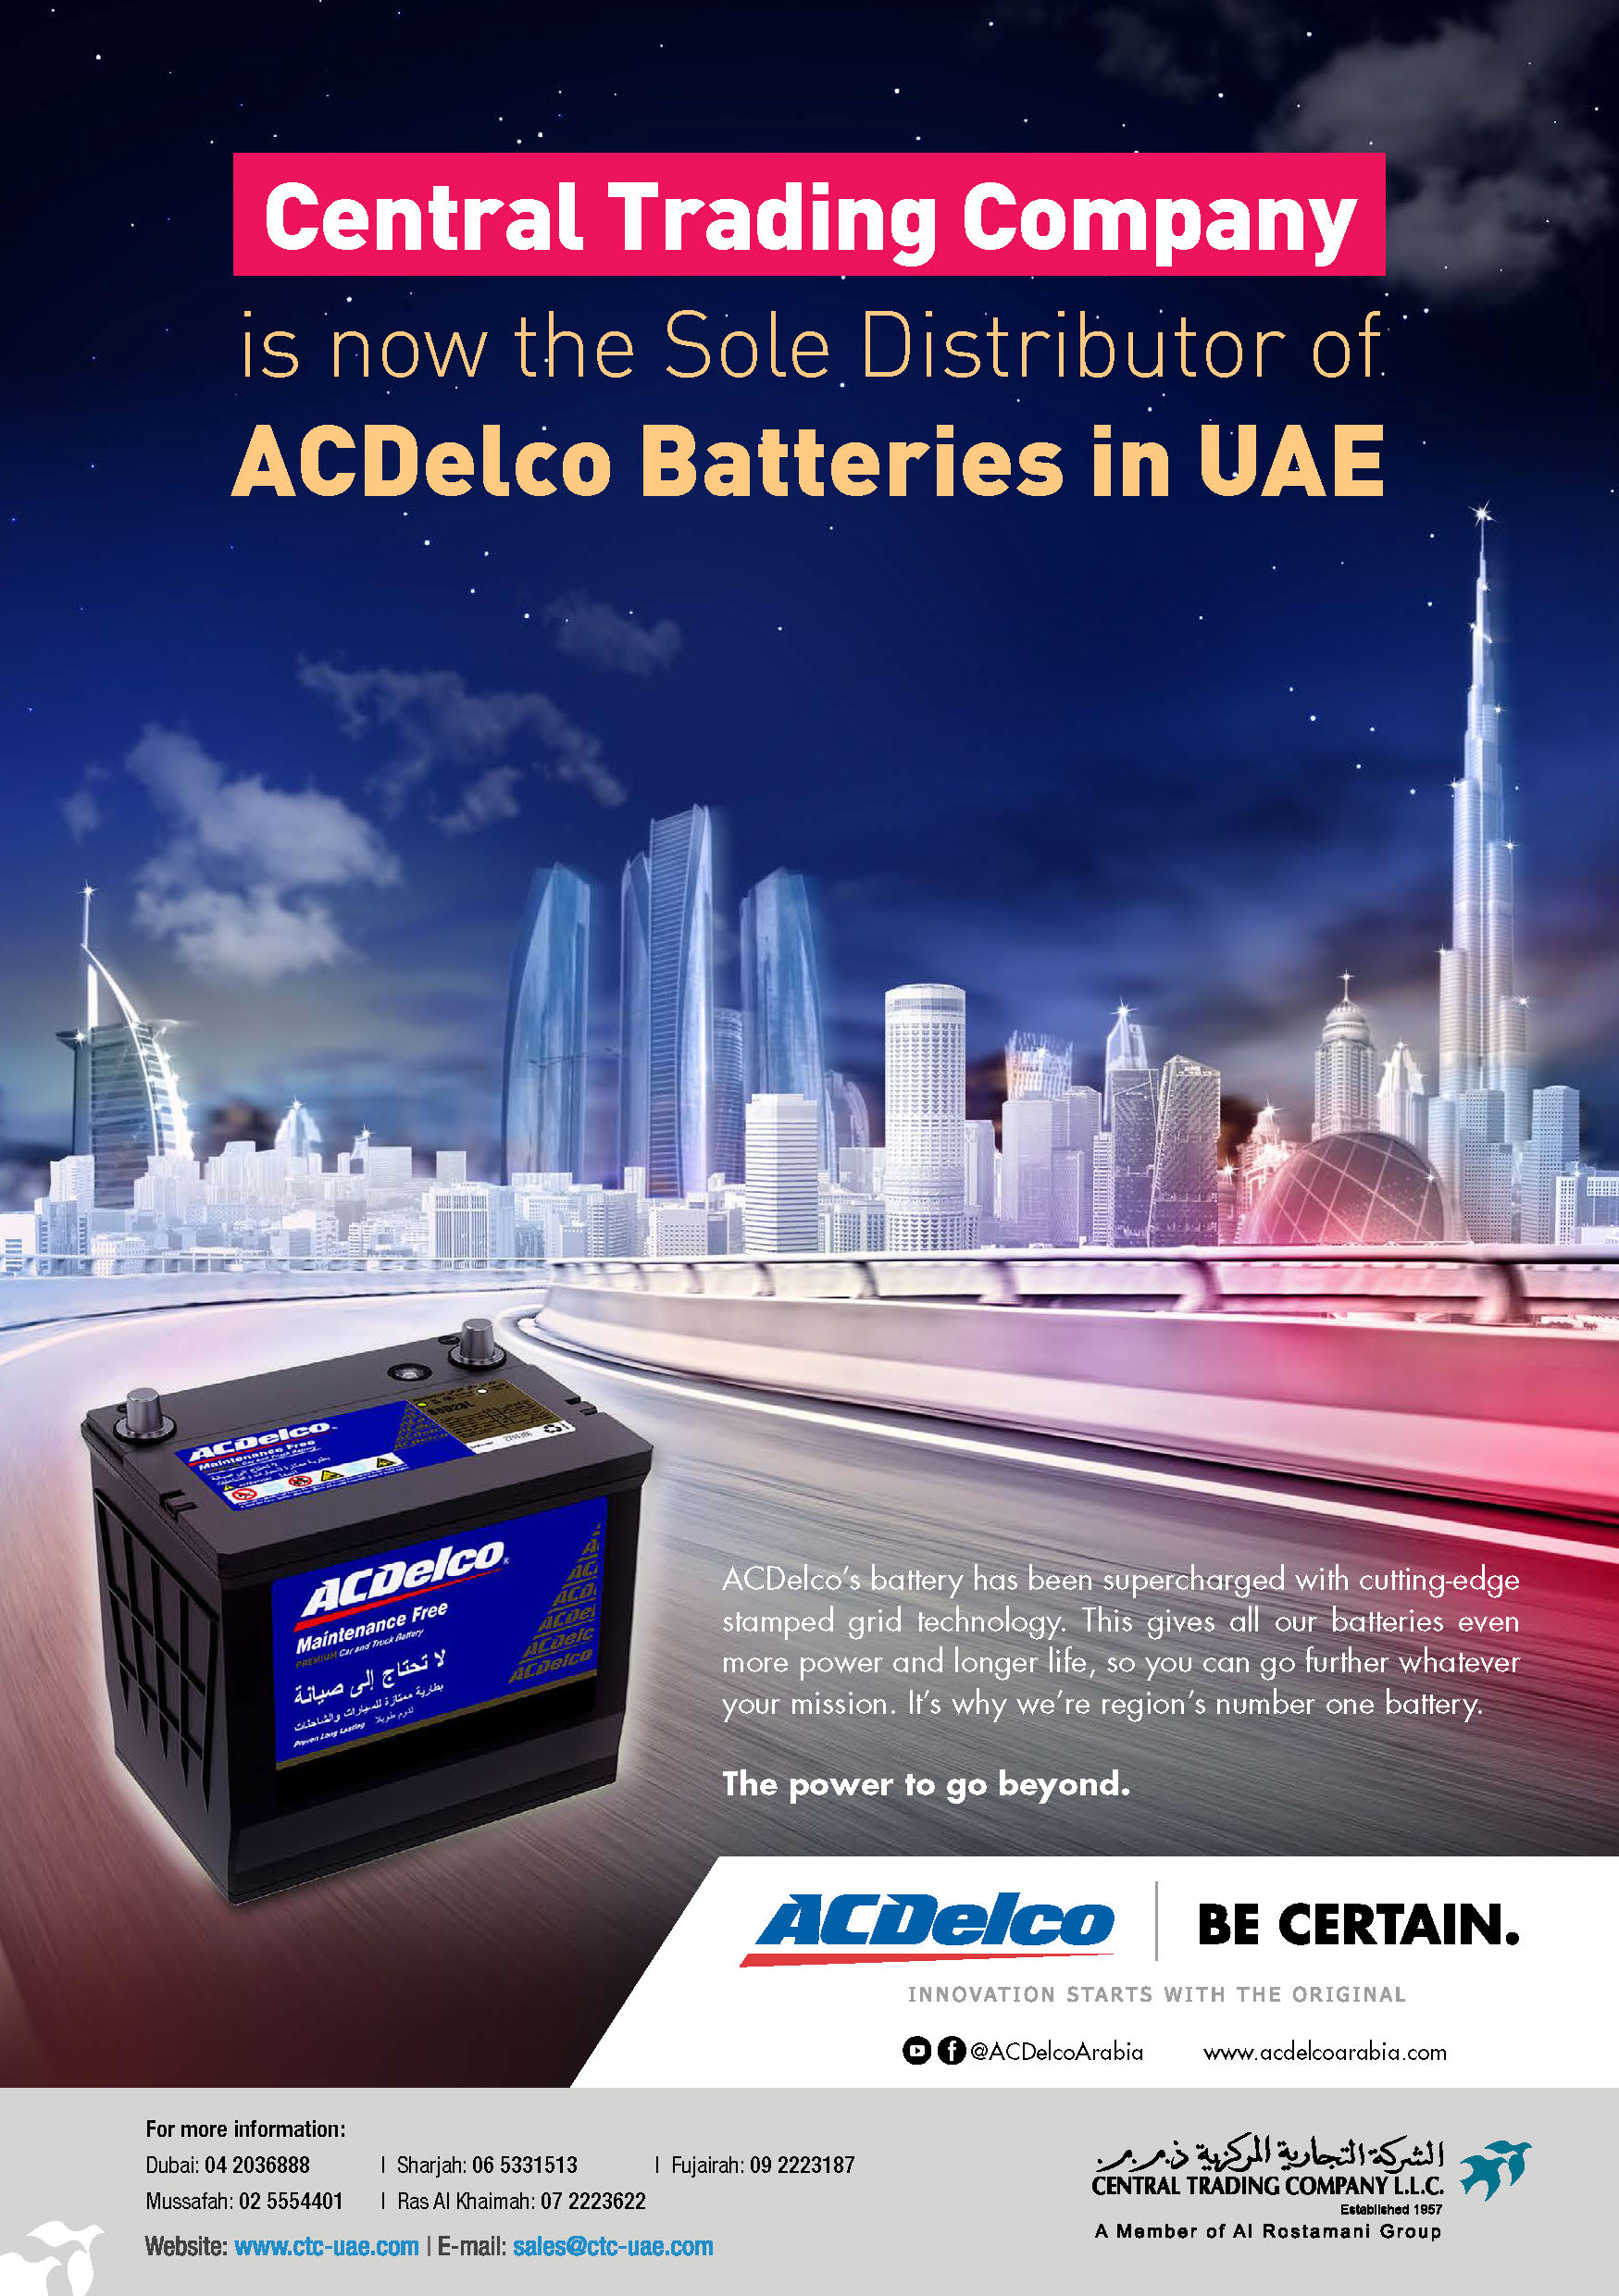 CTC is a Sole Distributor of ACDelco batteries in UAE